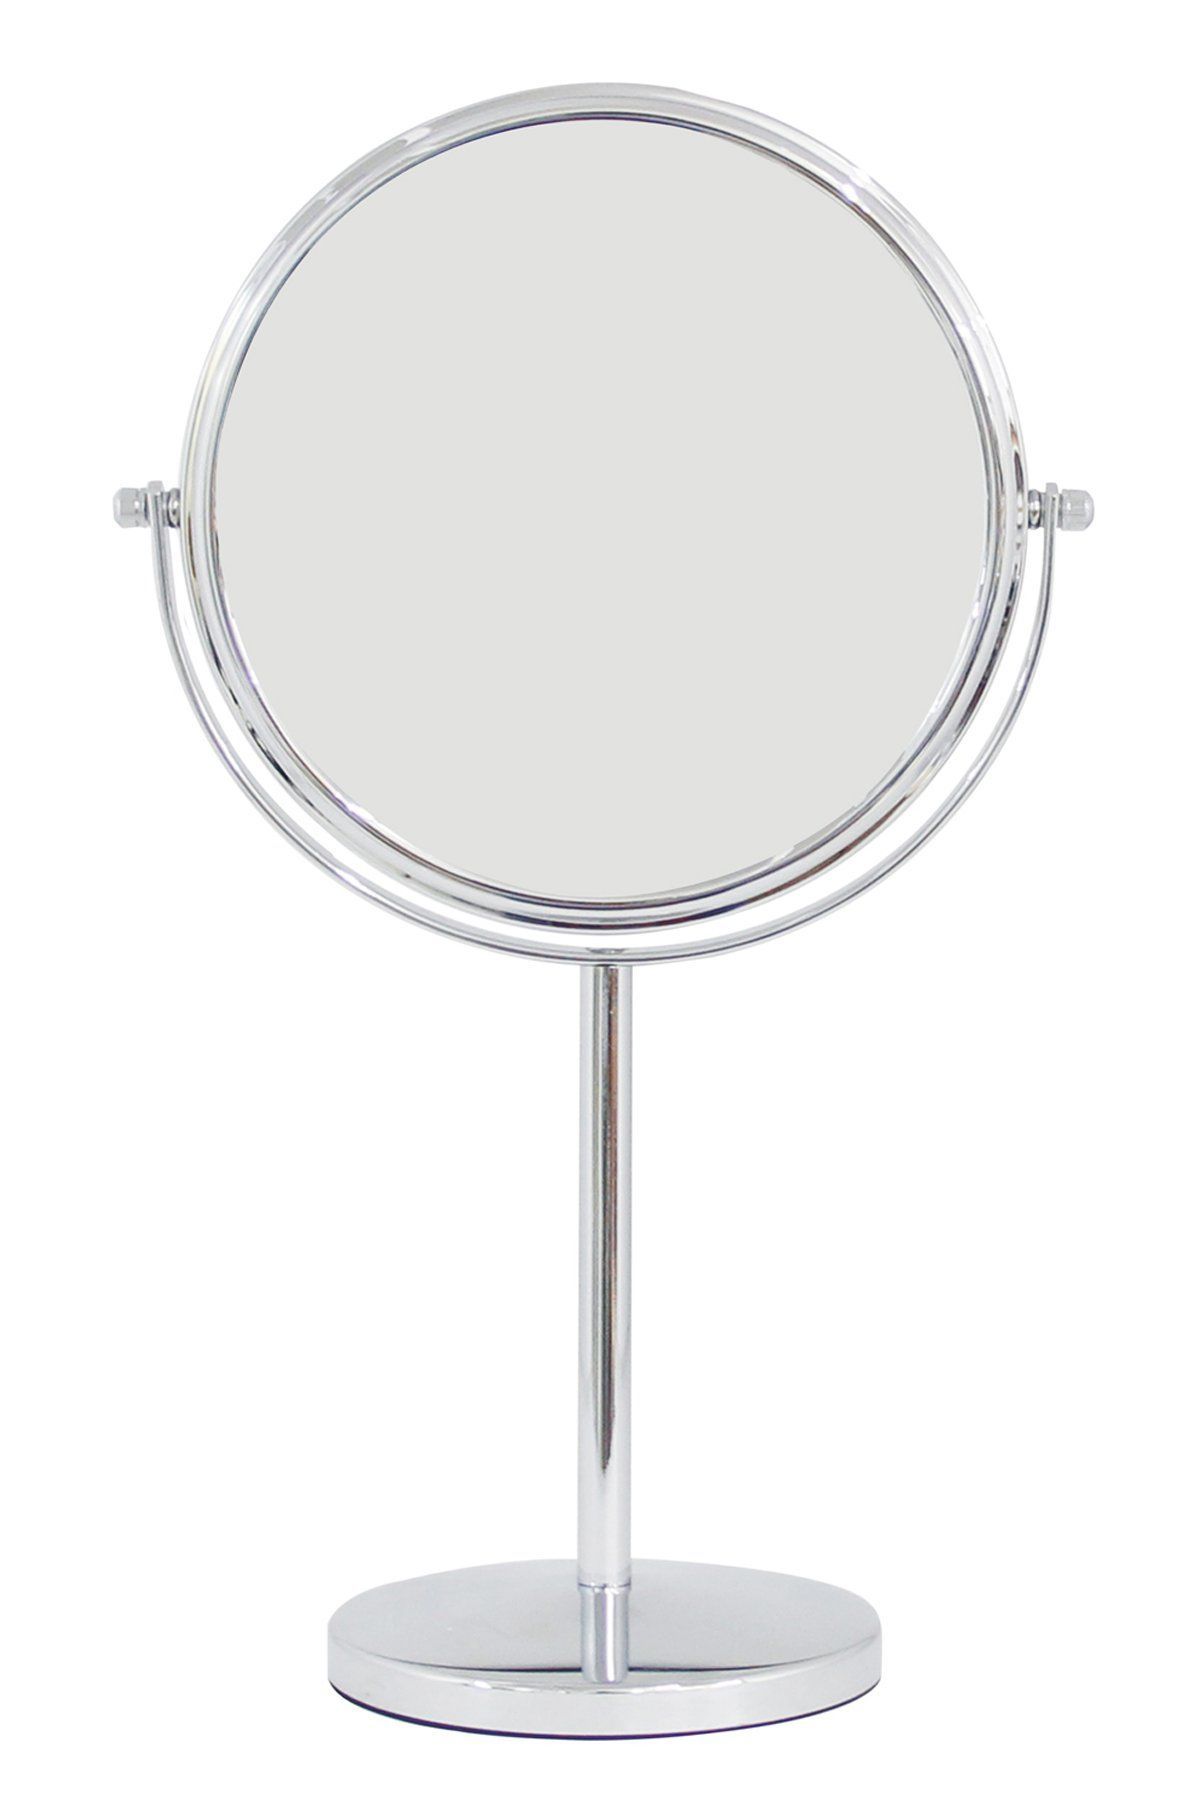 Two Sided (1X 3X) Countertop Tabletop Vanity Makeup Mirror – Silver For Single Sided Chrome Makeup Stand Mirrors (View 7 of 15)